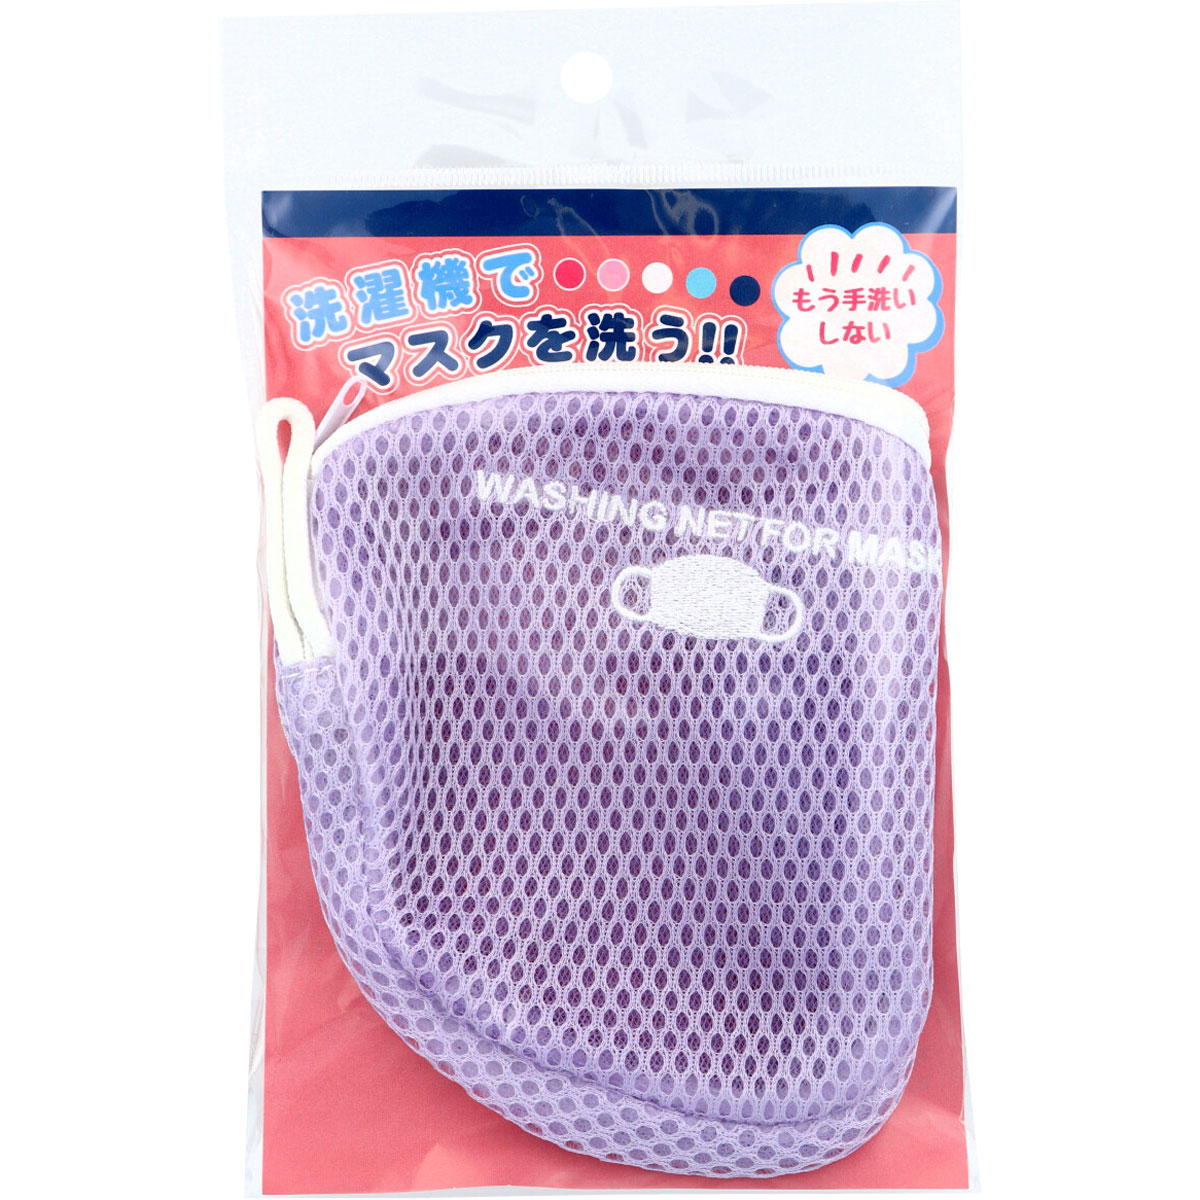 Picture of Purple color Washing bag for a face mask